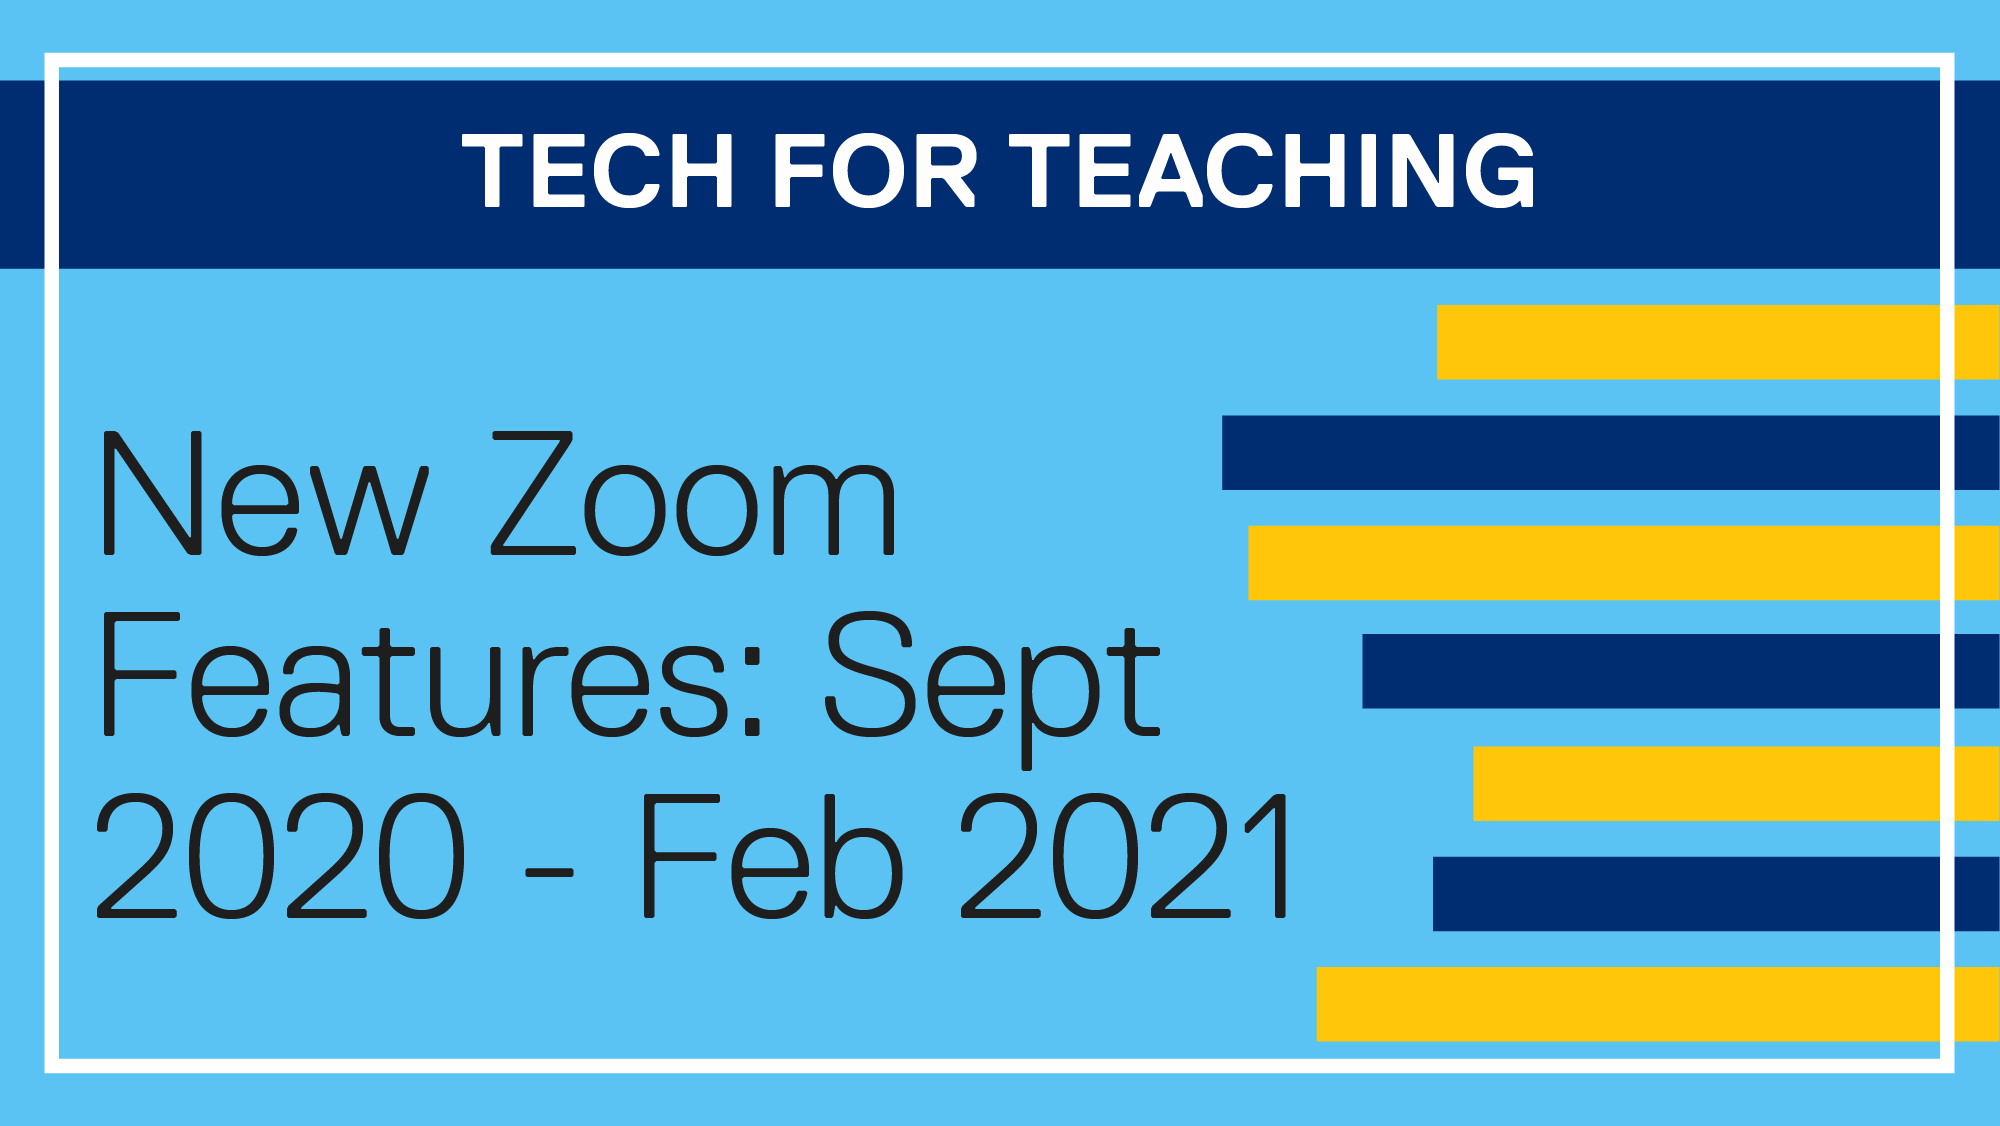 Tech for Teaching: New Zoom Features (Sept 2020 - Feb 2021)